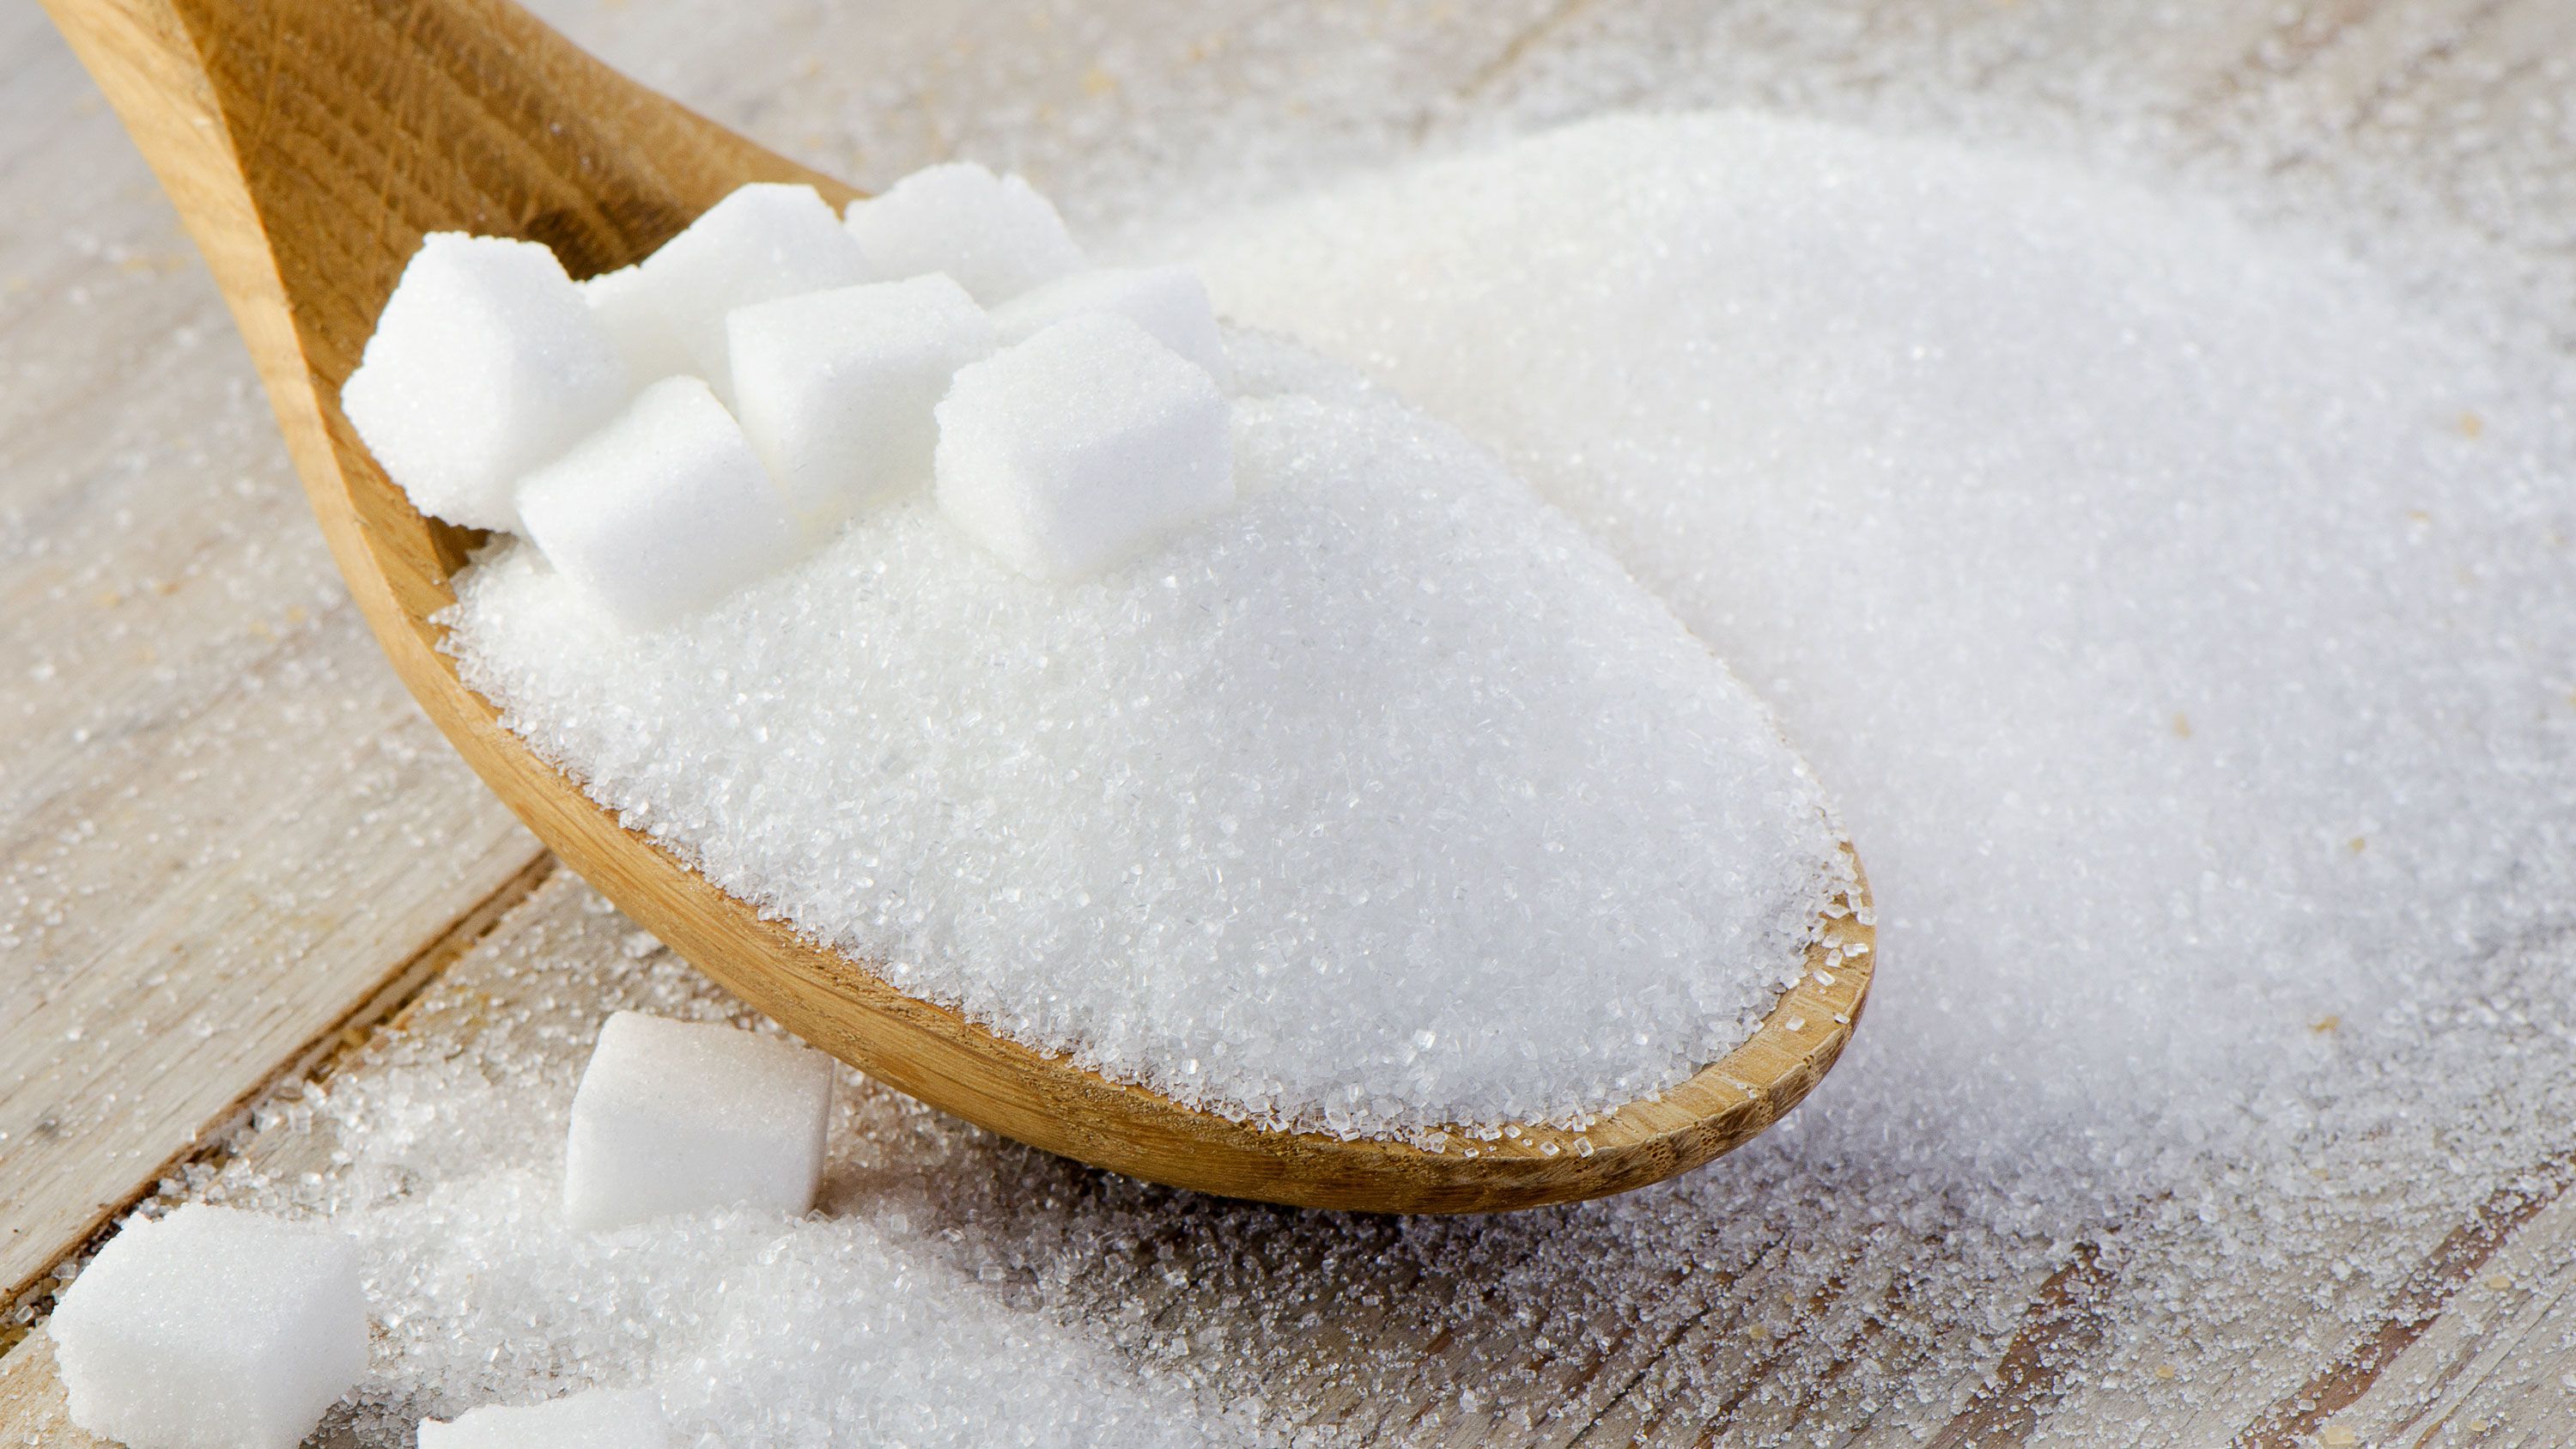 Eating too much 'free sugar' has 45 negative health effects, study finds